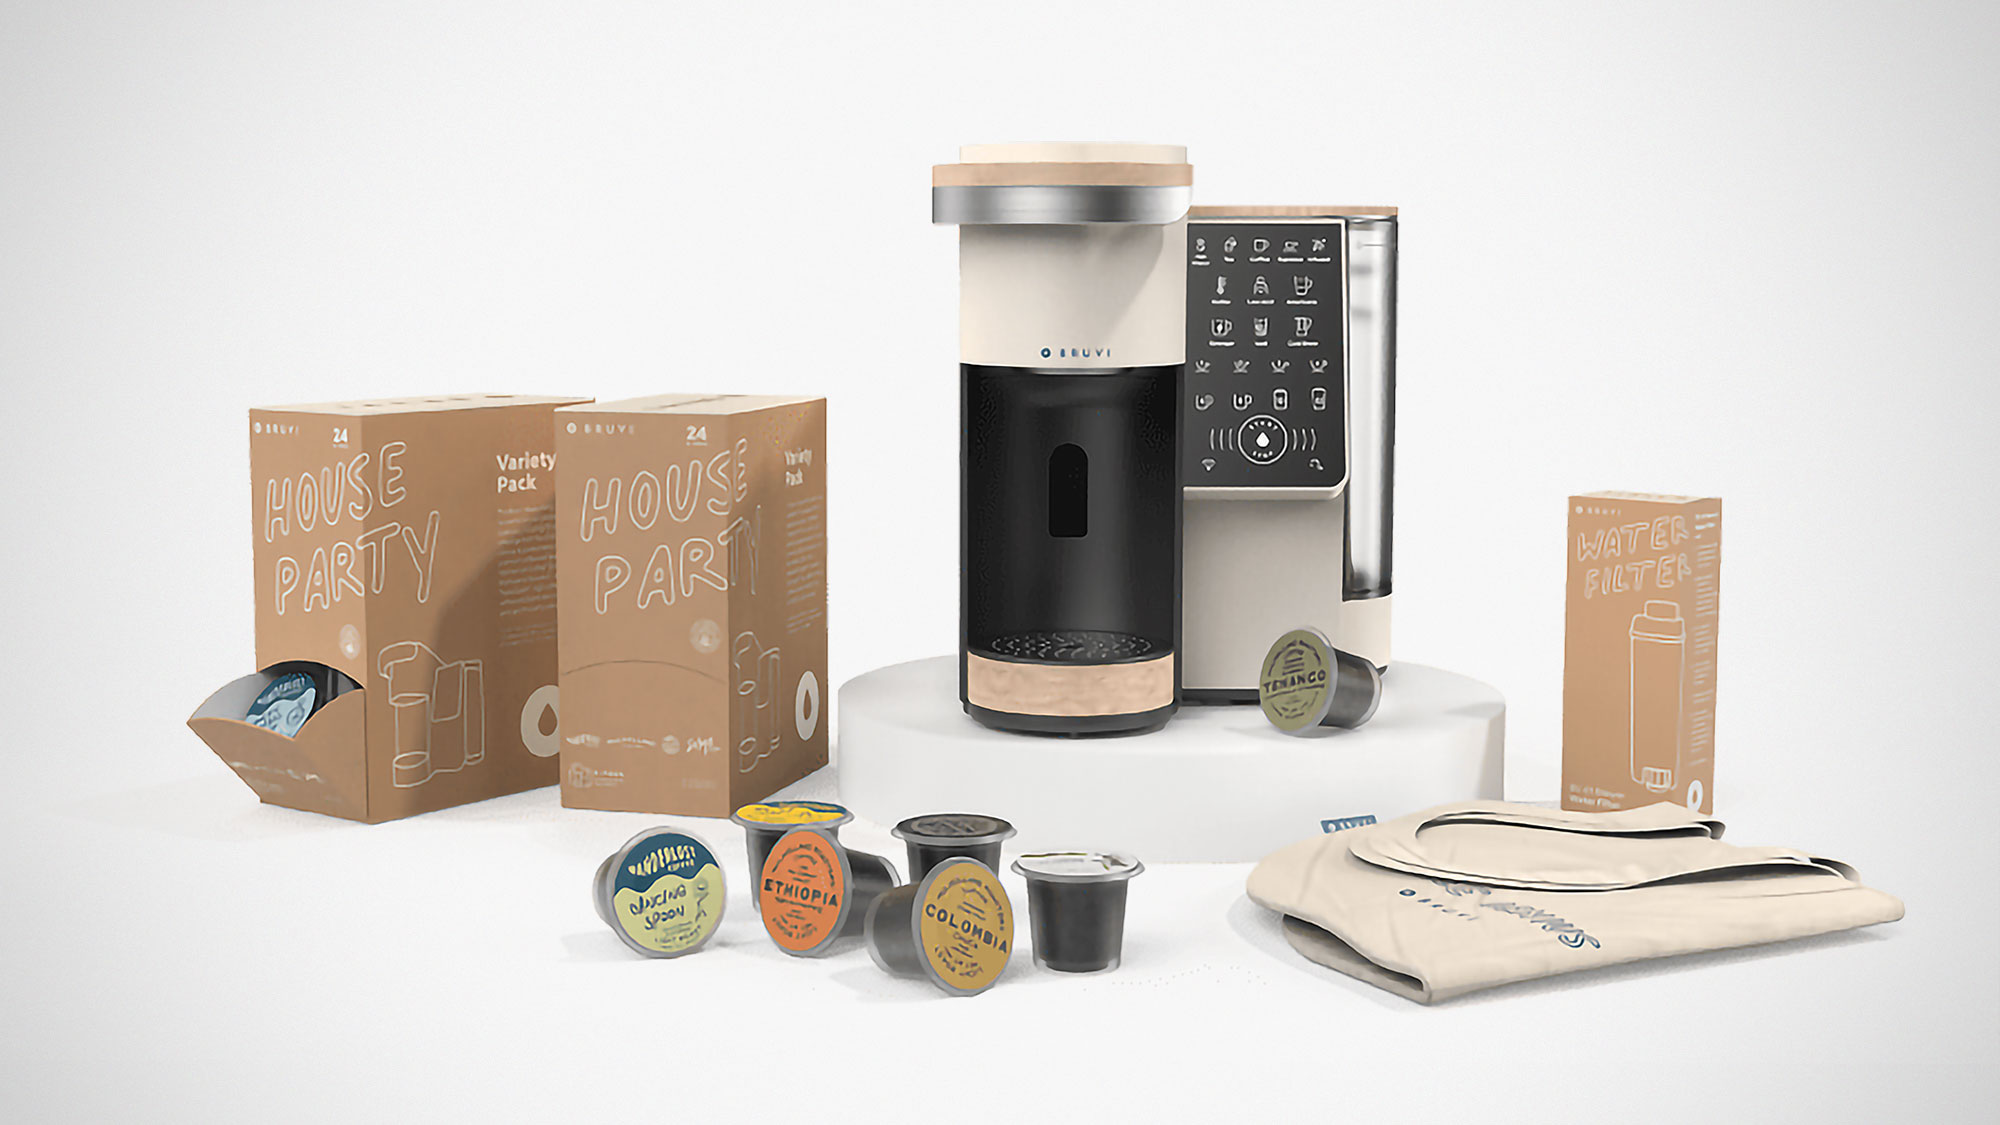 Bruvi is Disrupting Keurig with a Tastier and Sustainable